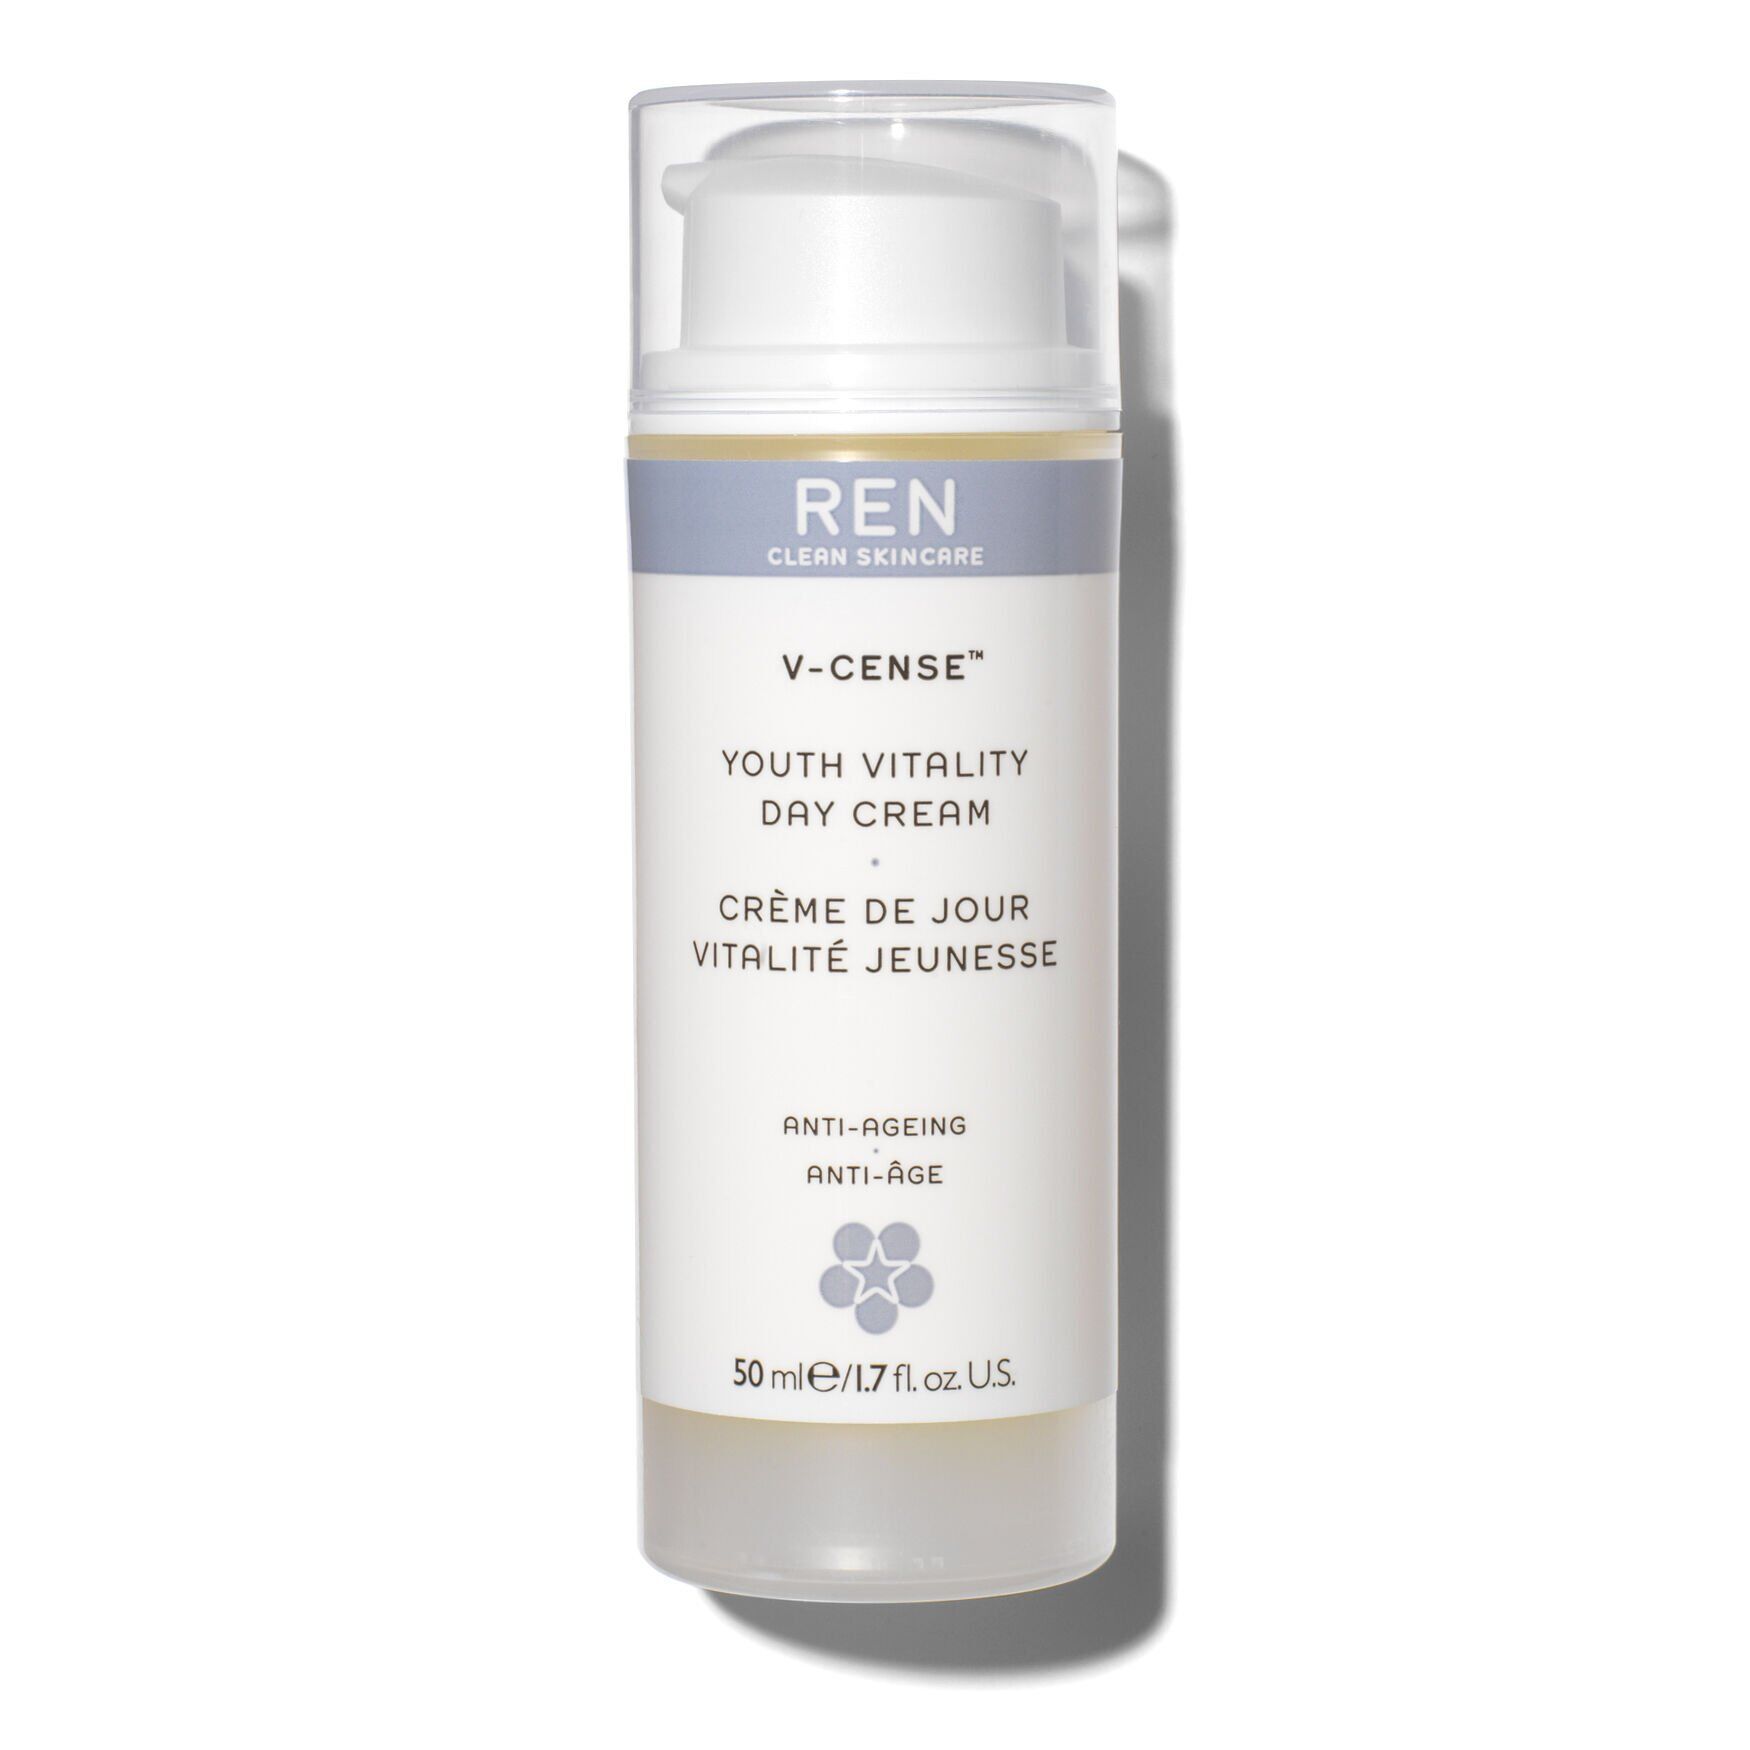 REN Clean Skincare - V-Cense Youth Vitality Day Cream by Ren Clean Skincare